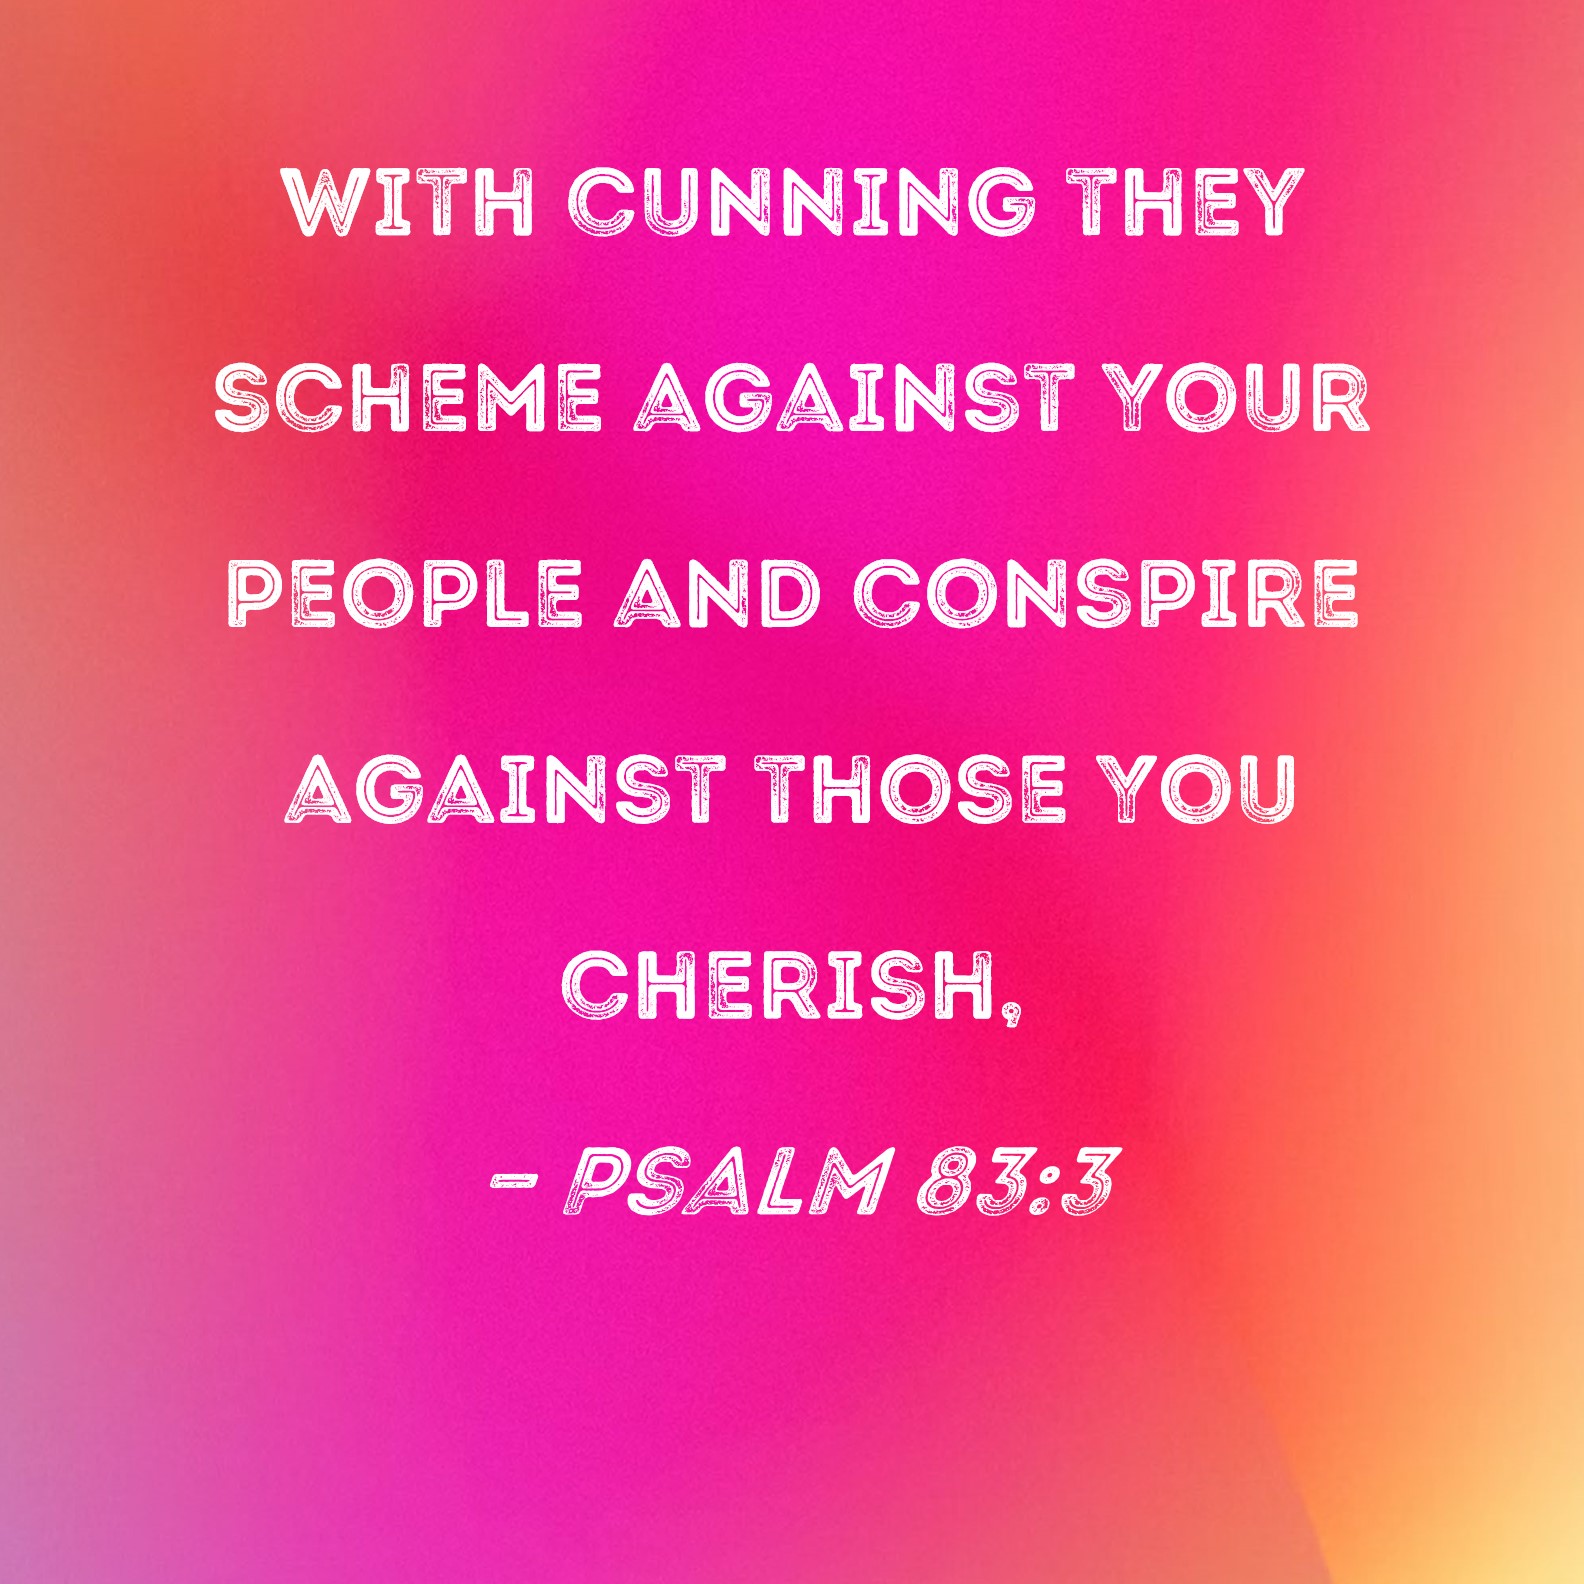 Psalm 833 With Cunning They Scheme Against Your People And Conspire Against Those You Cherish 